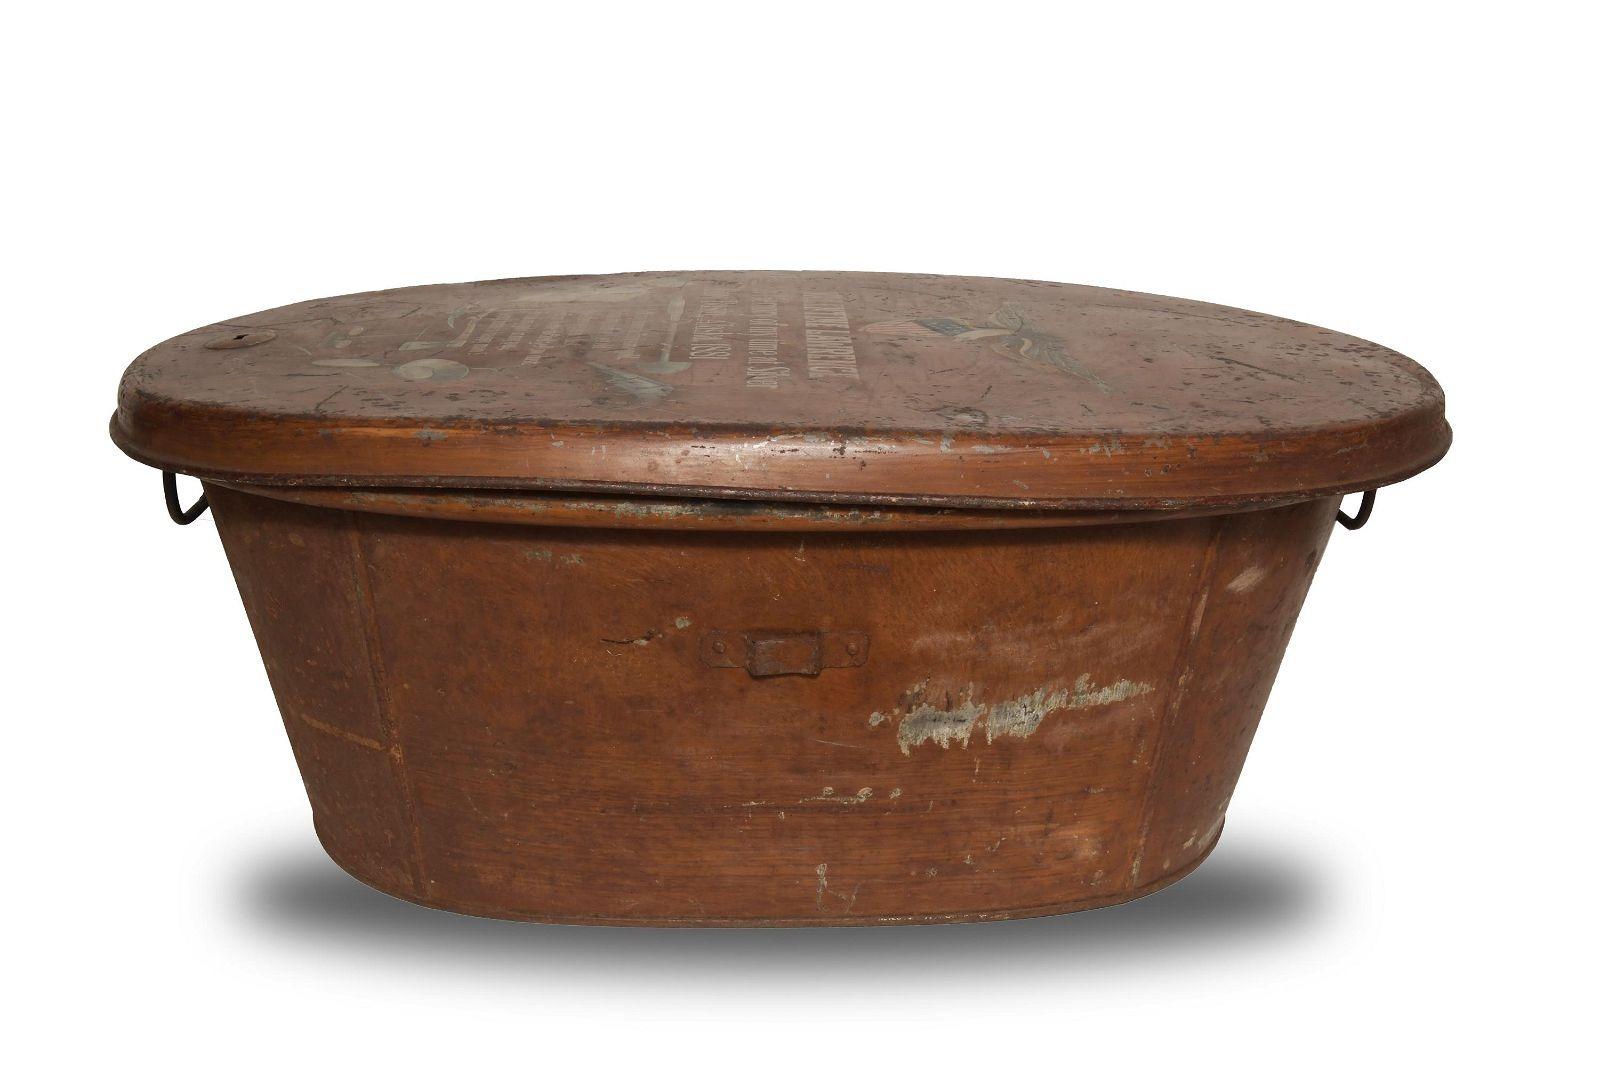 Antique Alaska Gold Rush Bath Tub / Trunk / Table Circa 1880s In Good Condition For Sale In New York, US